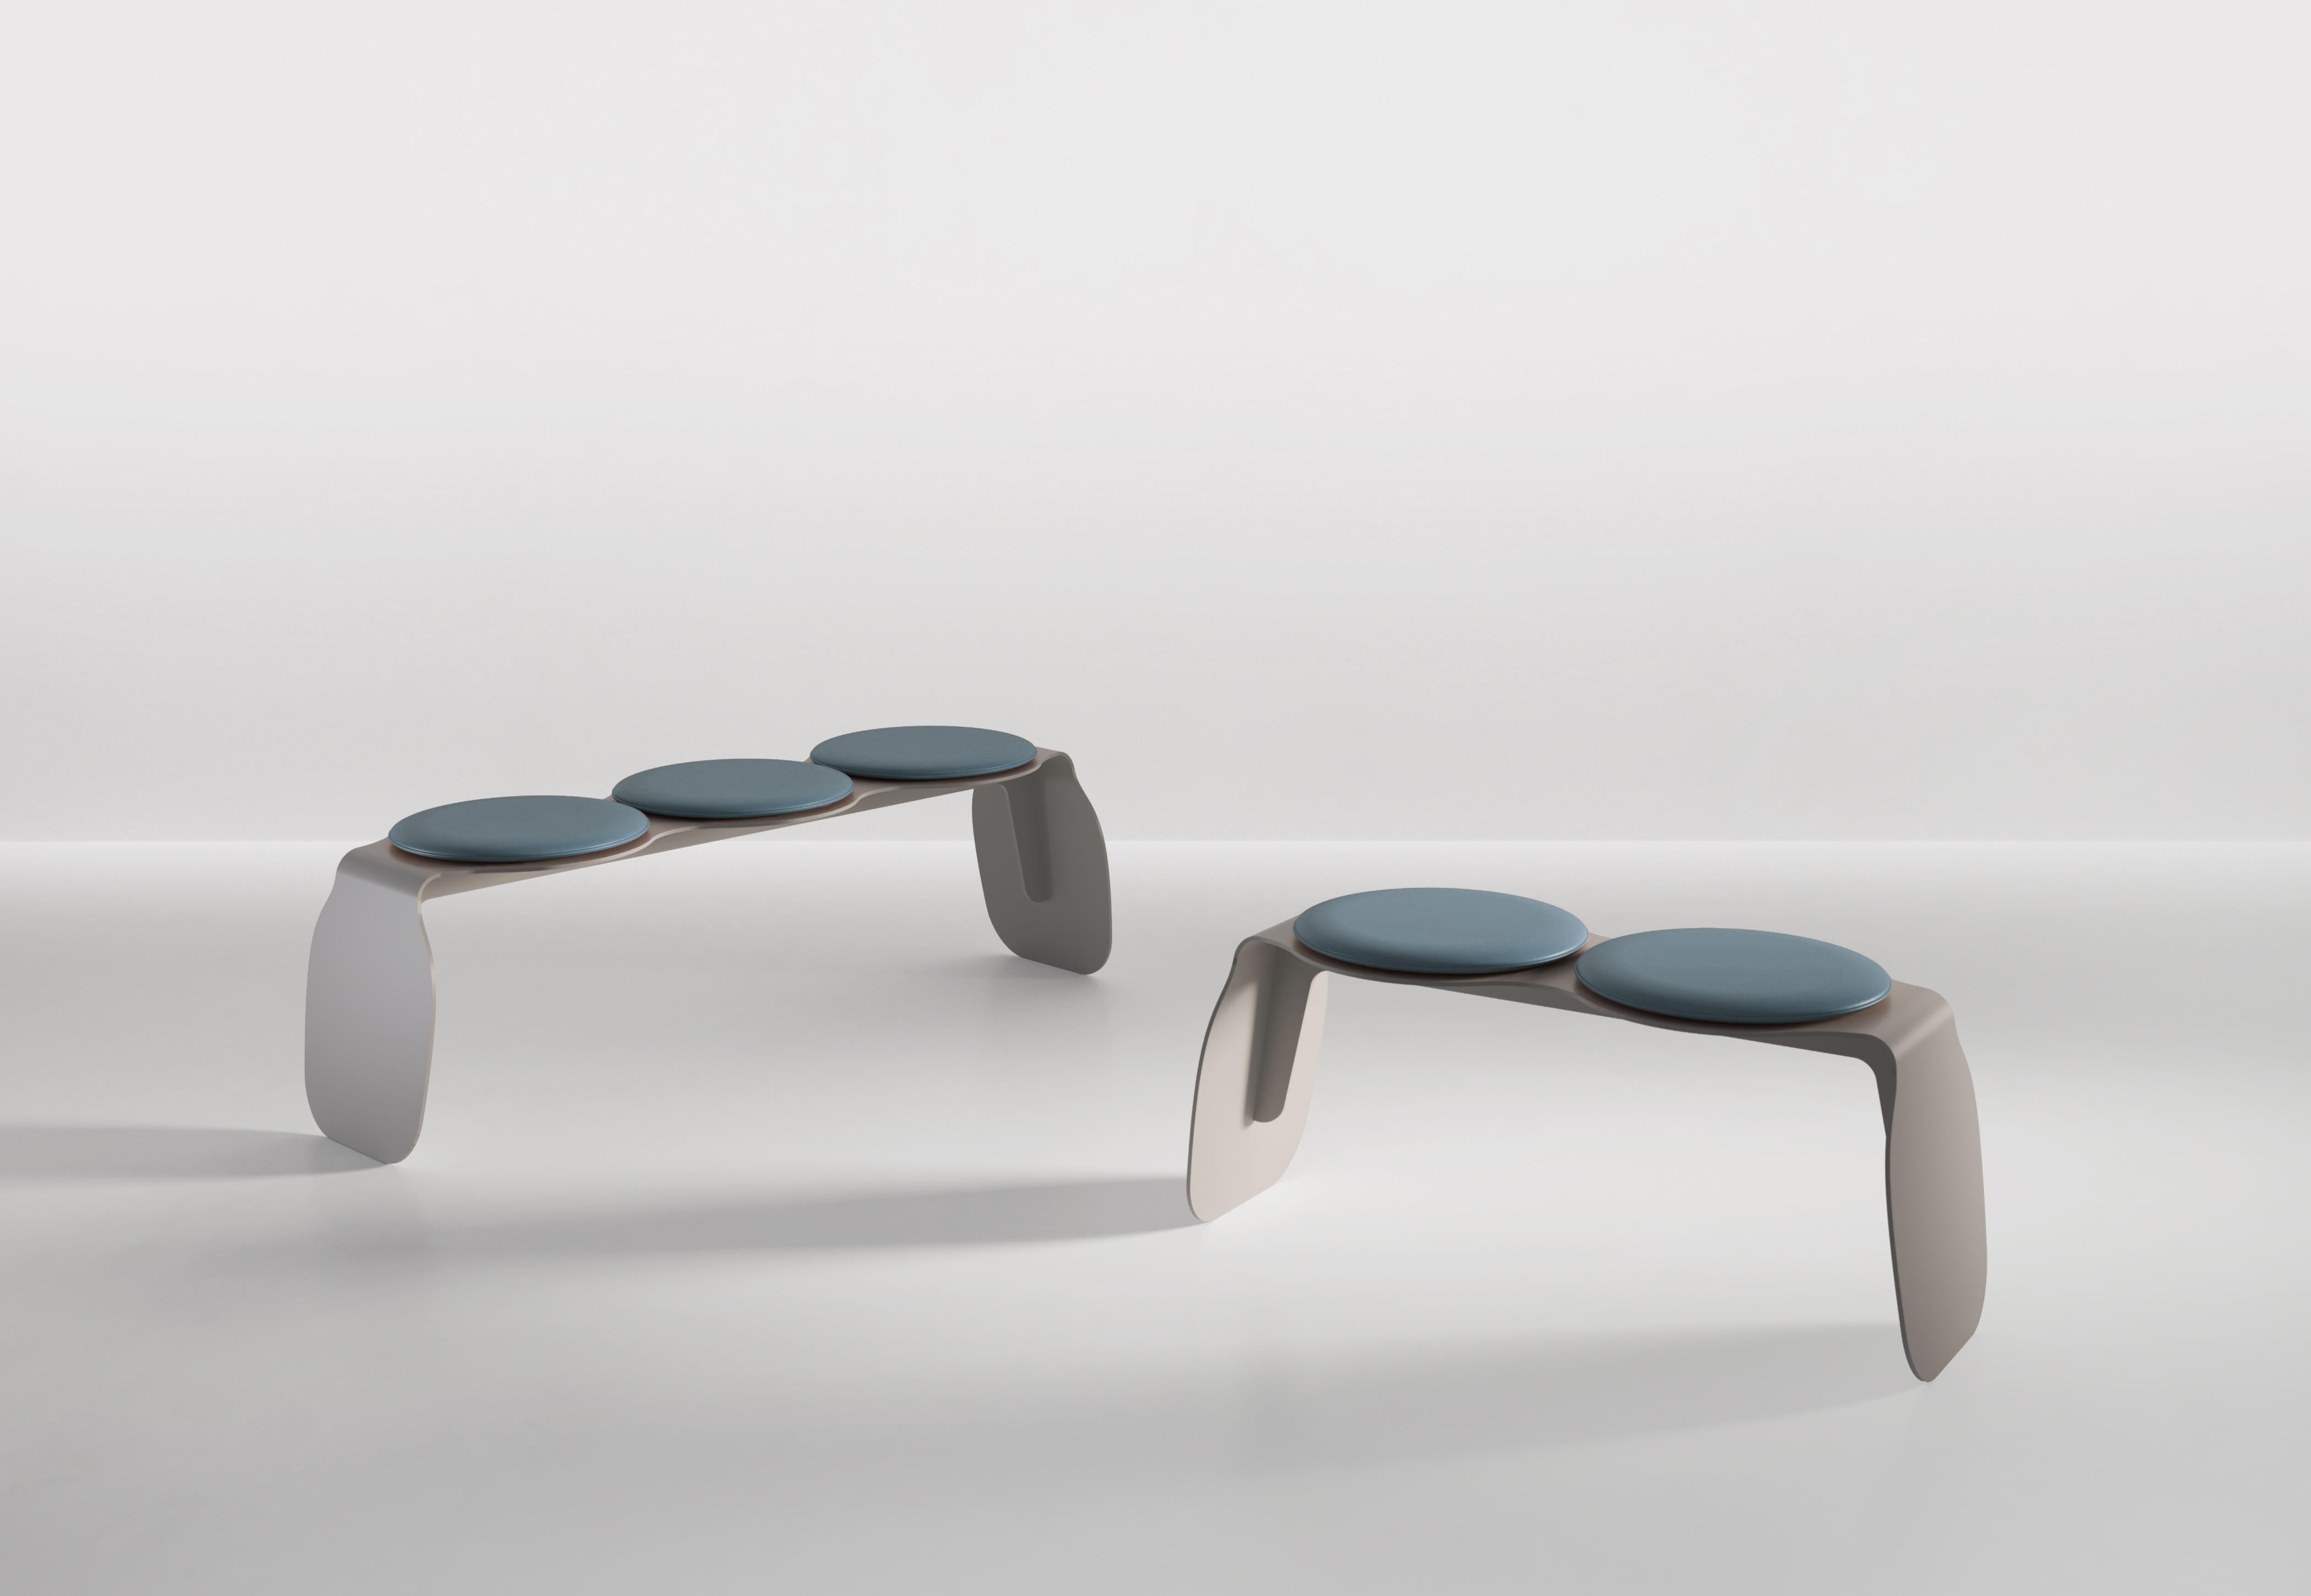 The Apollo series is comprised of benches and stools available in 1, 2 or 3 seater options. The seat is made from a single piece of bent metal and all 3 are available with or without seat cushions. Each seat cushion contains a small magnet to secure